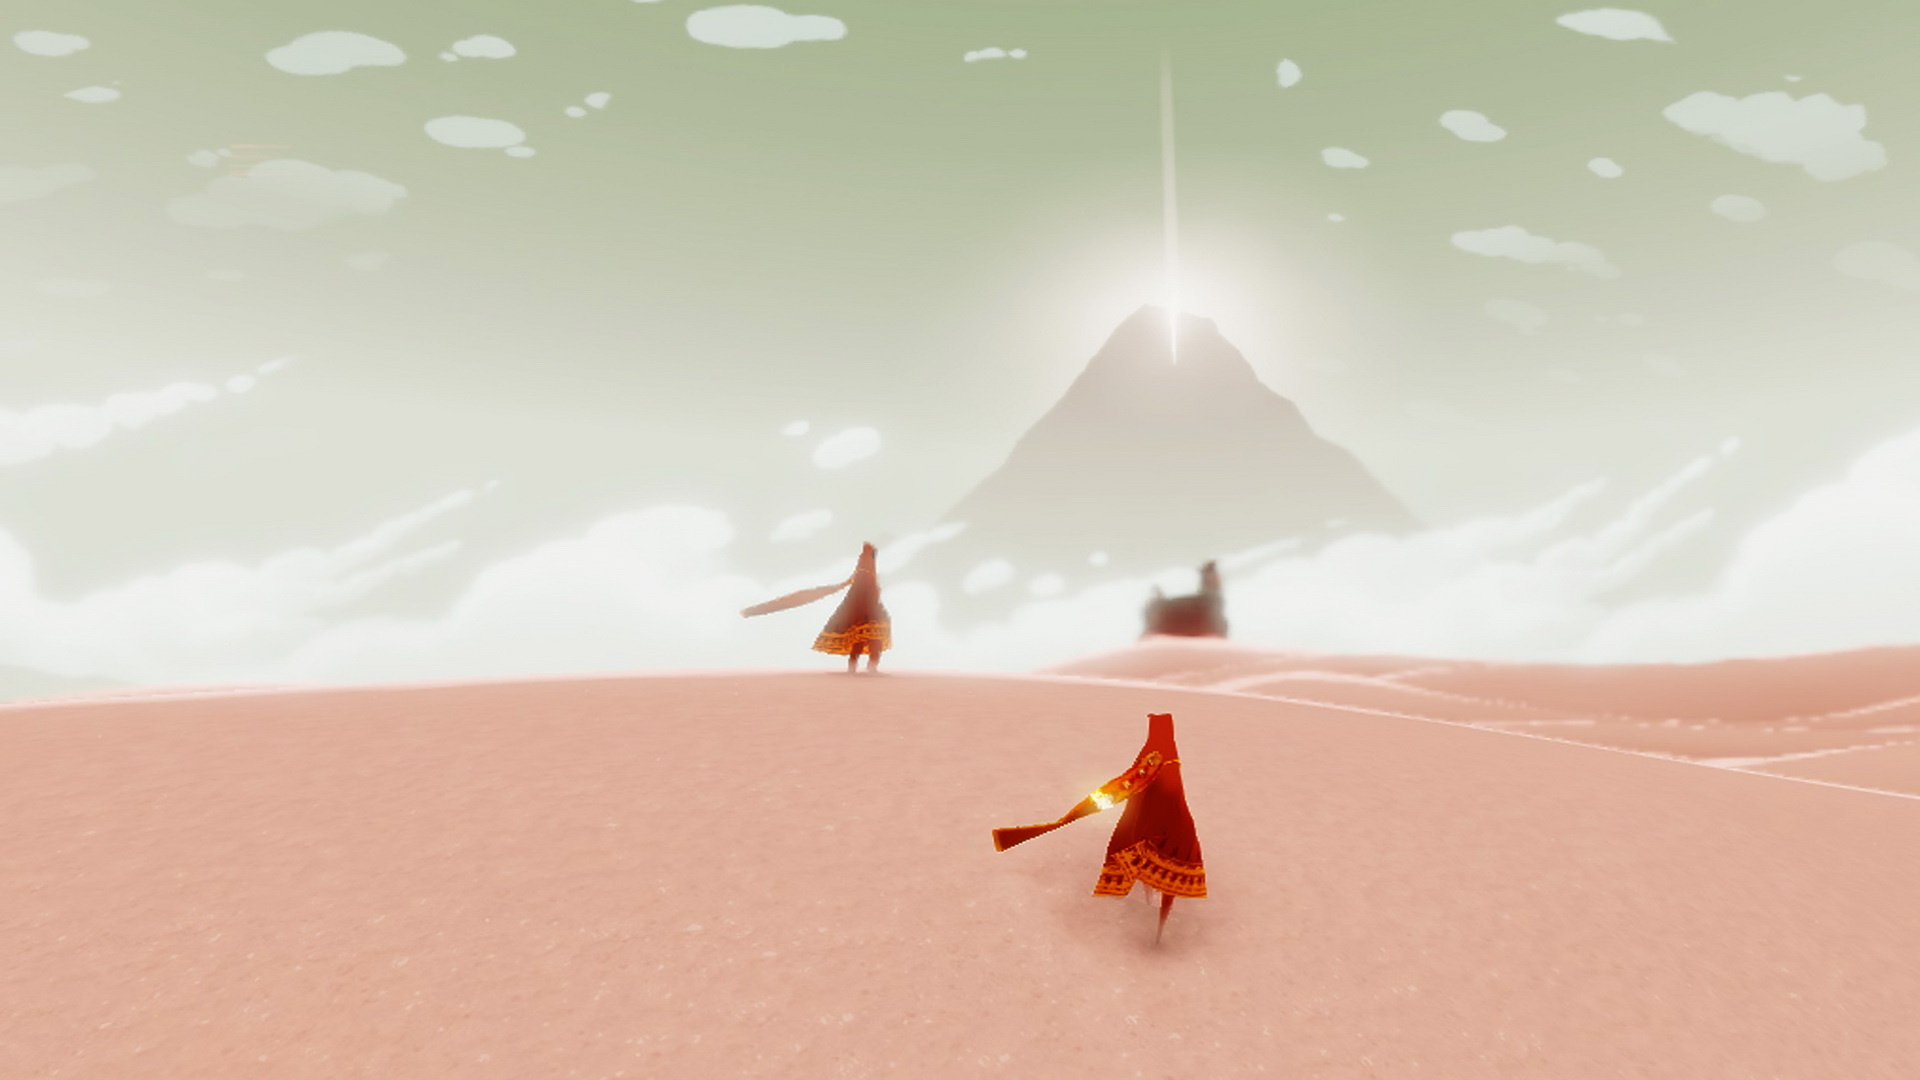 Journey game, Free download game wallpapers, Captivating journey, Epic adventure, 1920x1080 Full HD Desktop